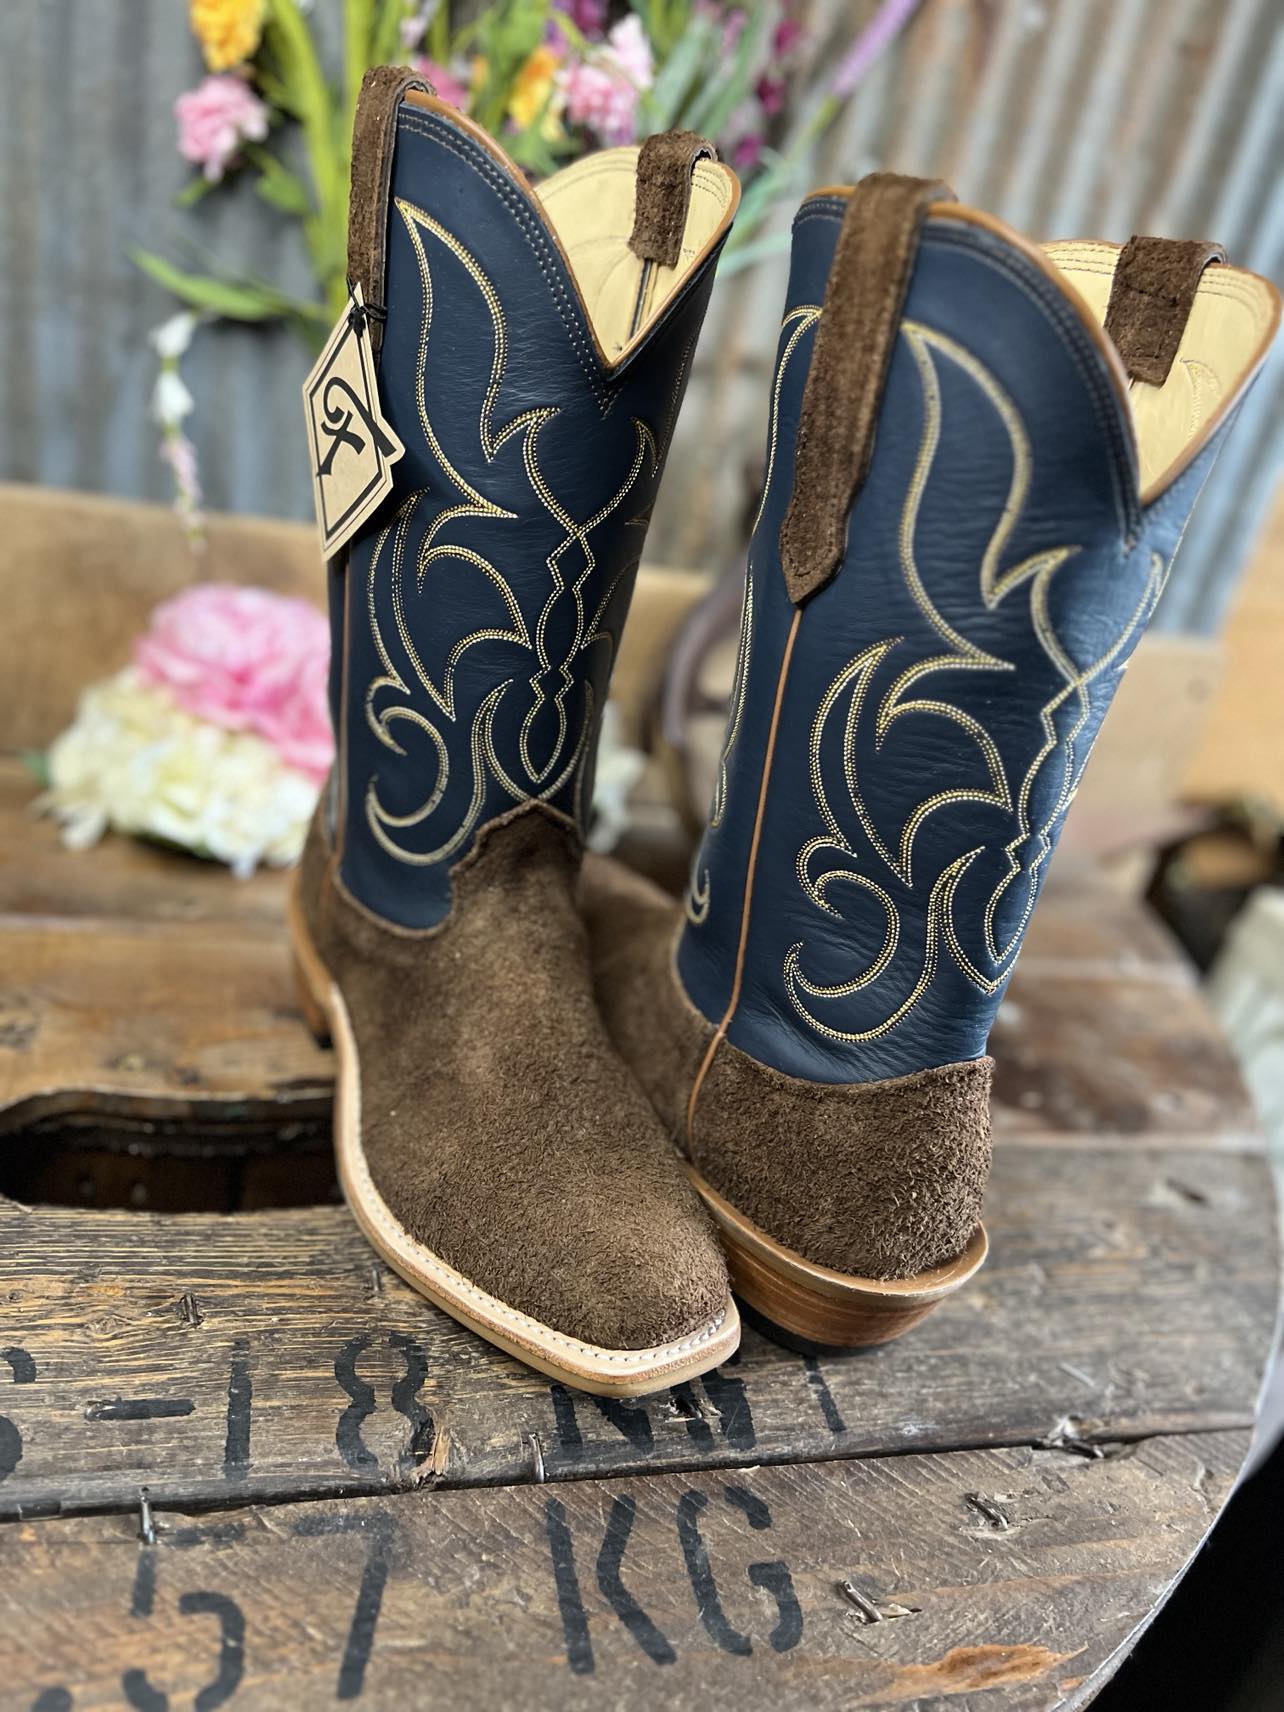 Mens Fenoglio Whiskey Byron Rough Out Boots-Men's Boots-Fenoglio Boots-Lucky J Boots & More, Women's, Men's, & Kids Western Store Located in Carthage, MO